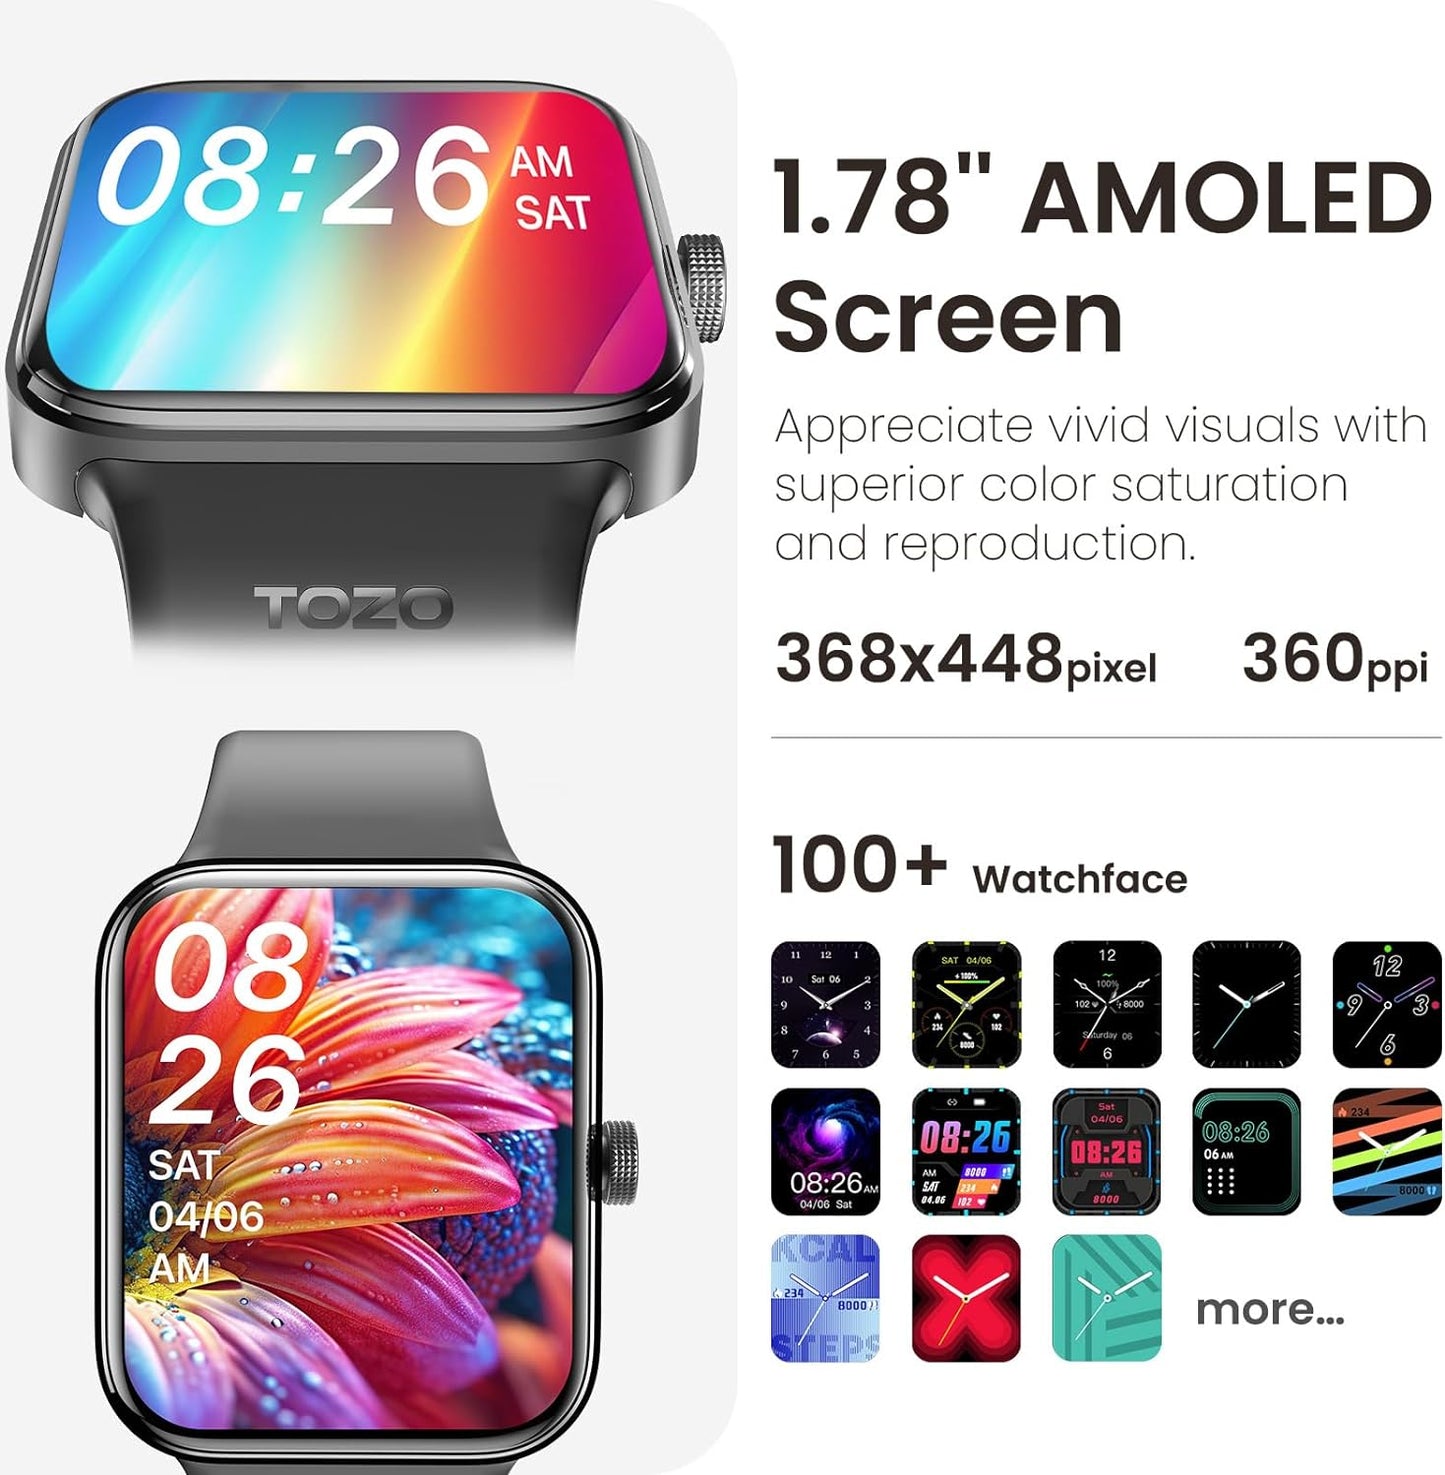 S4 Acufit One Smart Watch 1.78" AMOLED Screen for Men Women, Bluetooth Call Dial Fitness Tracker, Heart Rate and Blood Oxygen, Sleep Monitor, IP68 Waterproof, Workout for Ios Android